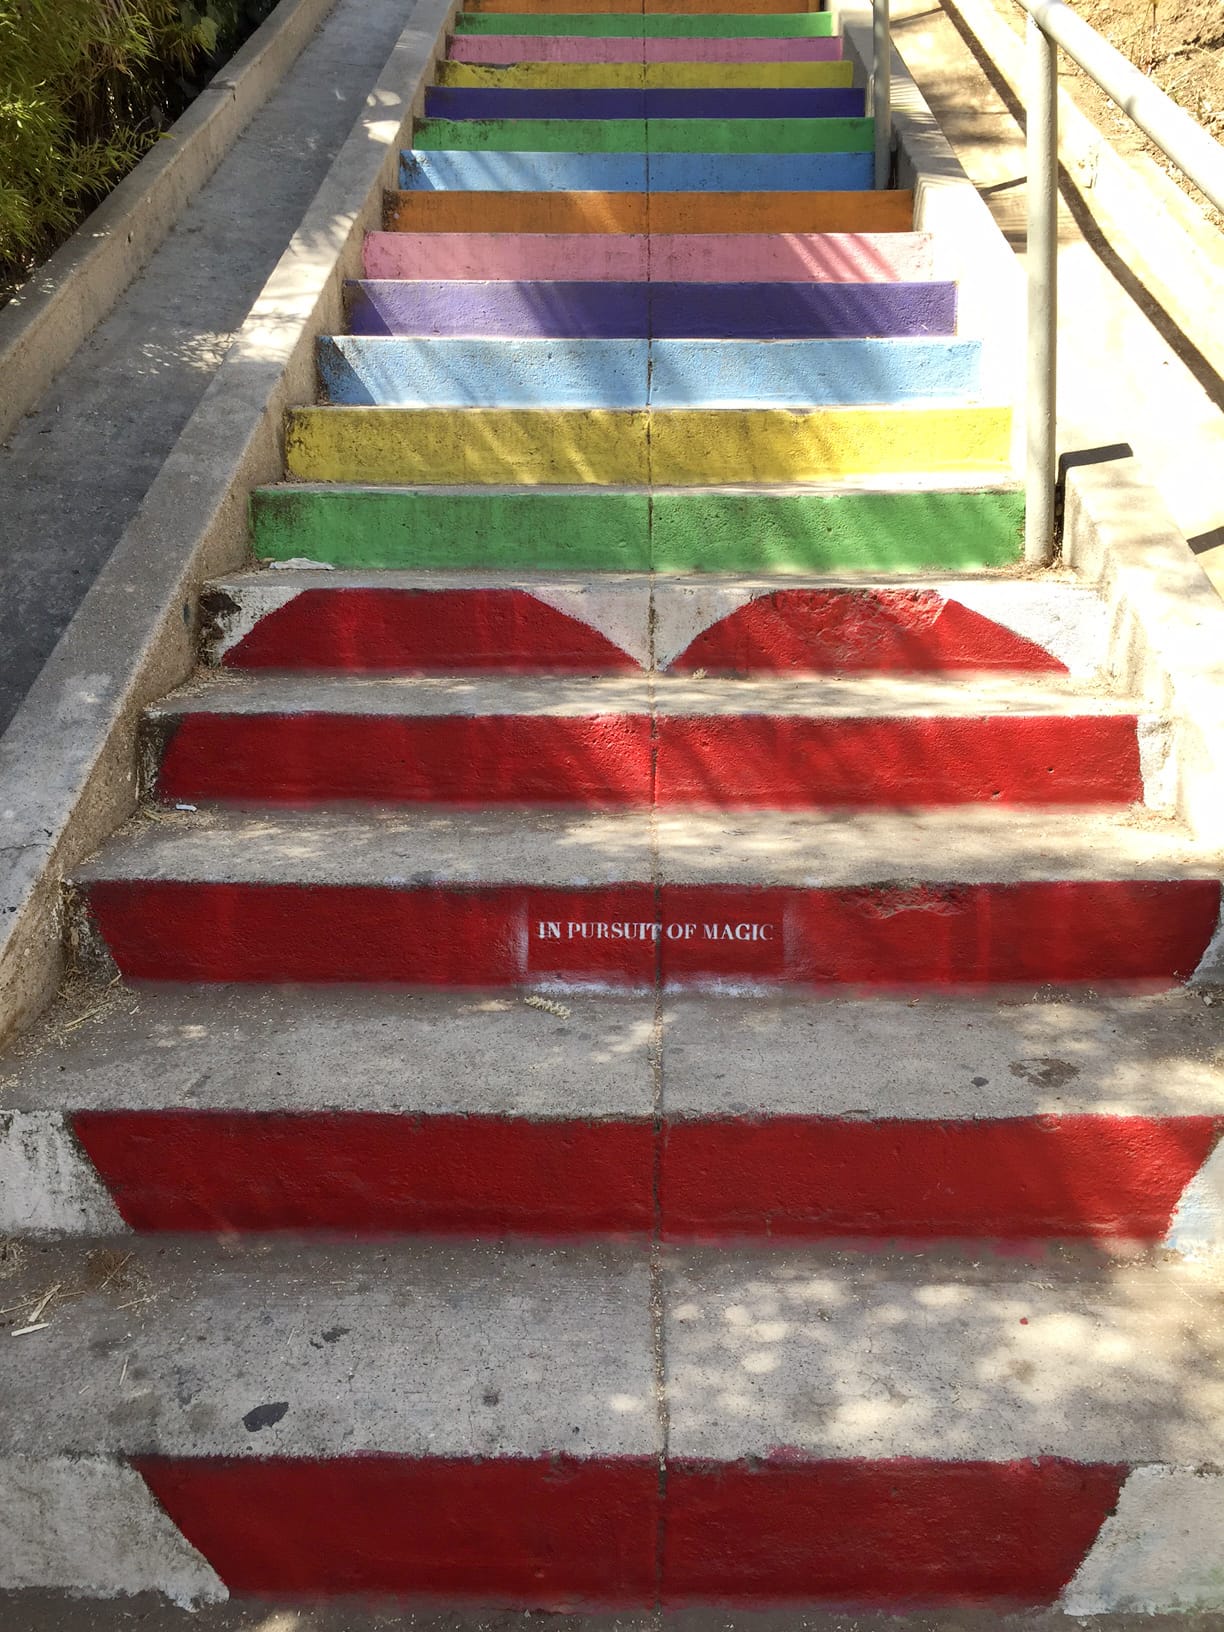 sugar and cloth behind the scenes lately, and we need a wedding hashtag - silverlake stairs in LA for filming!